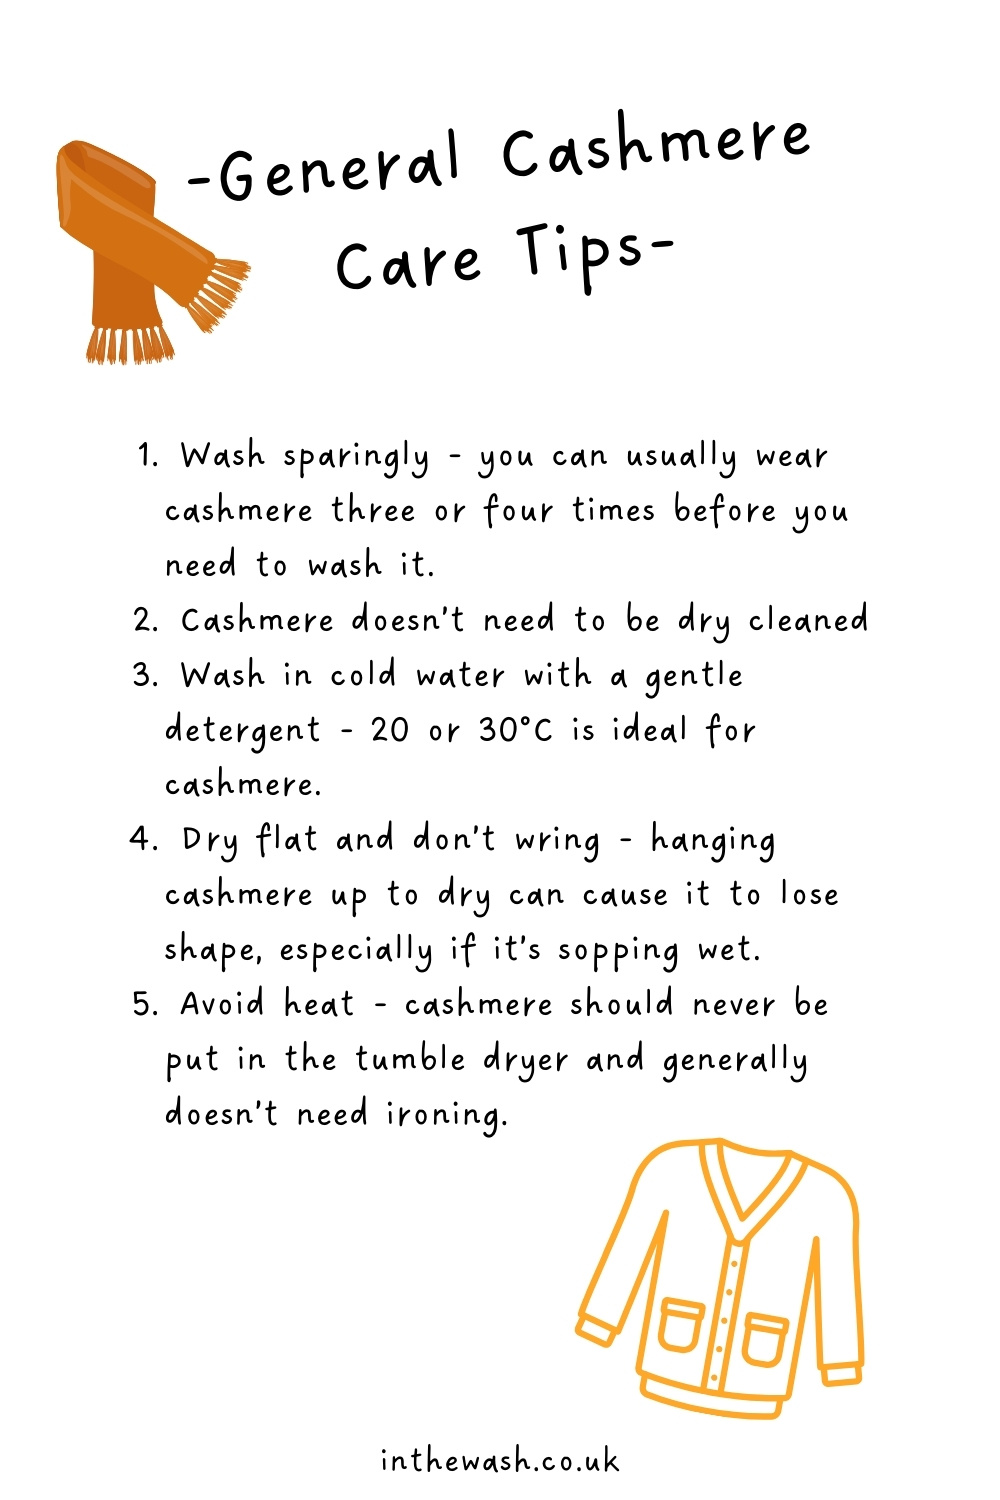 Cashmere care tips